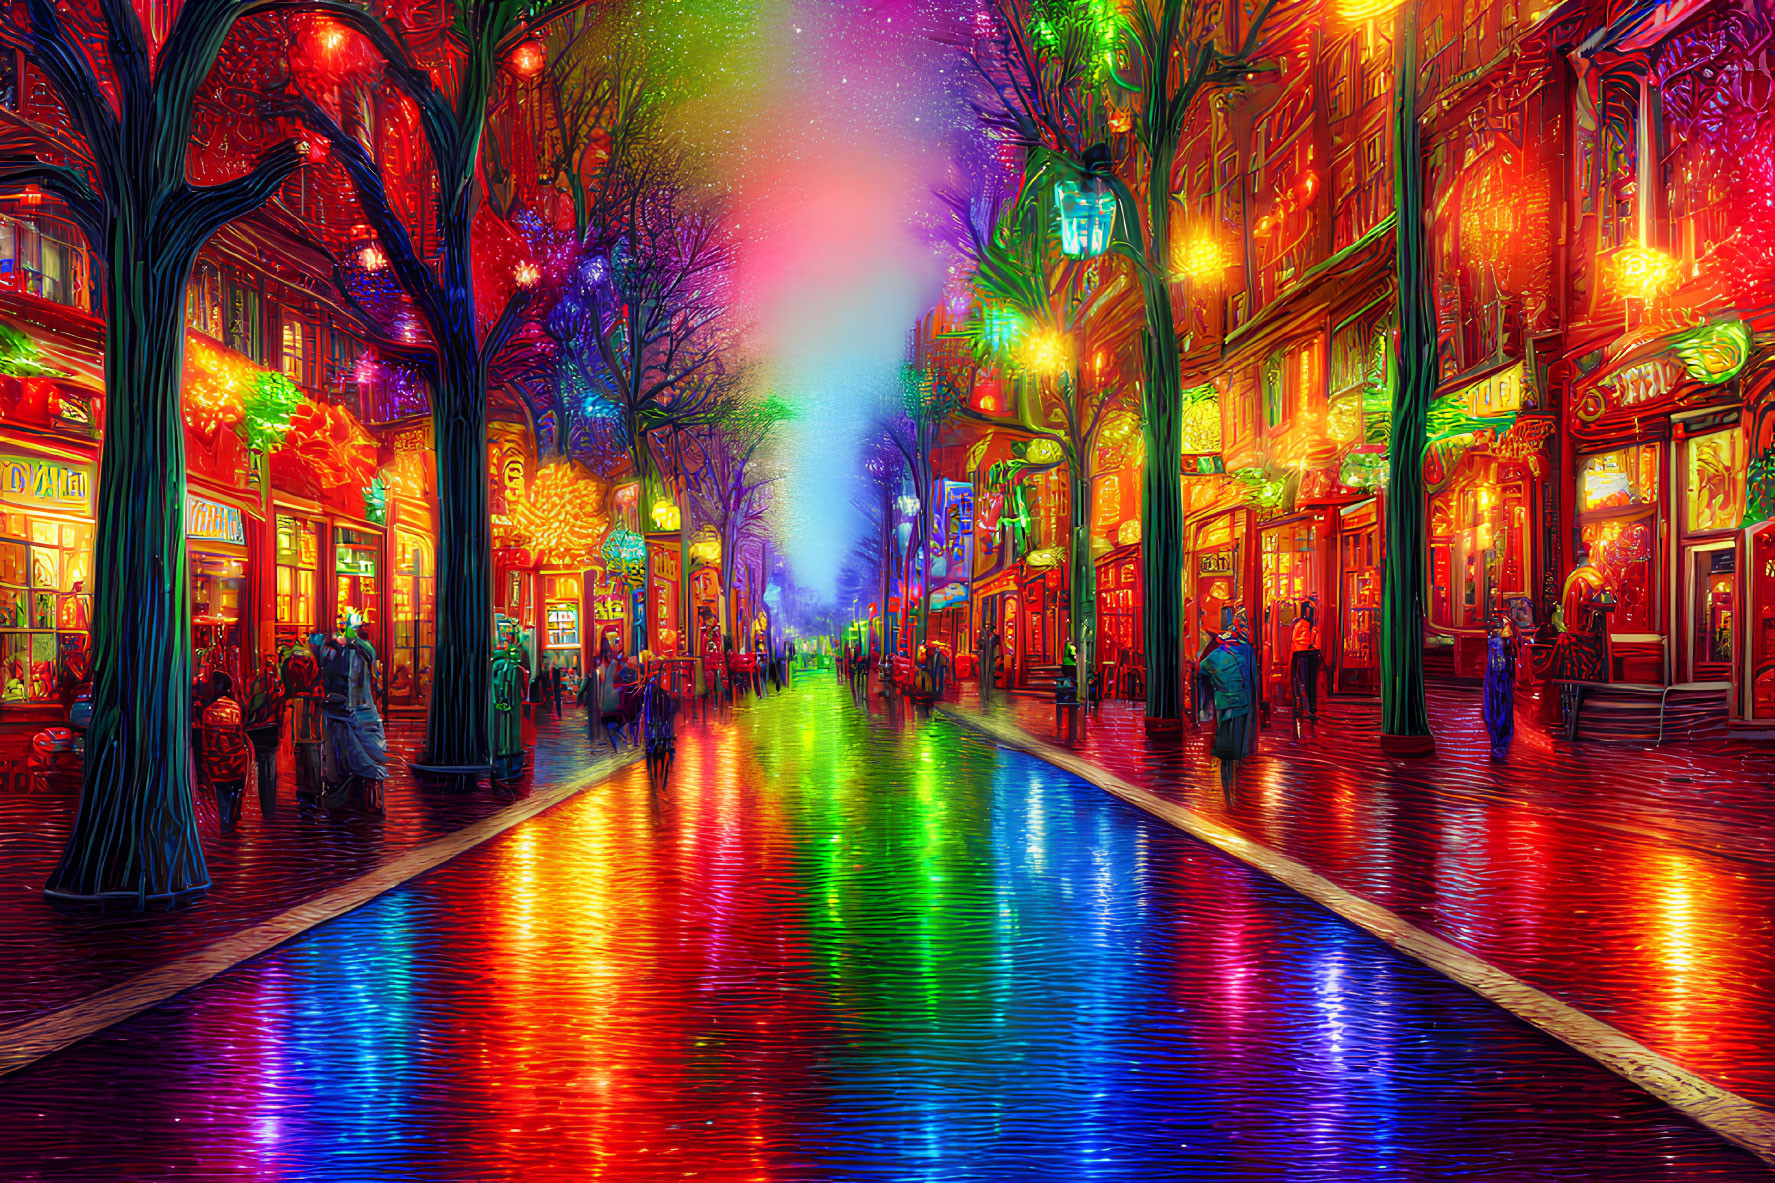 Colorful night street scene with neon lights, bustling crowd, and illuminated trees